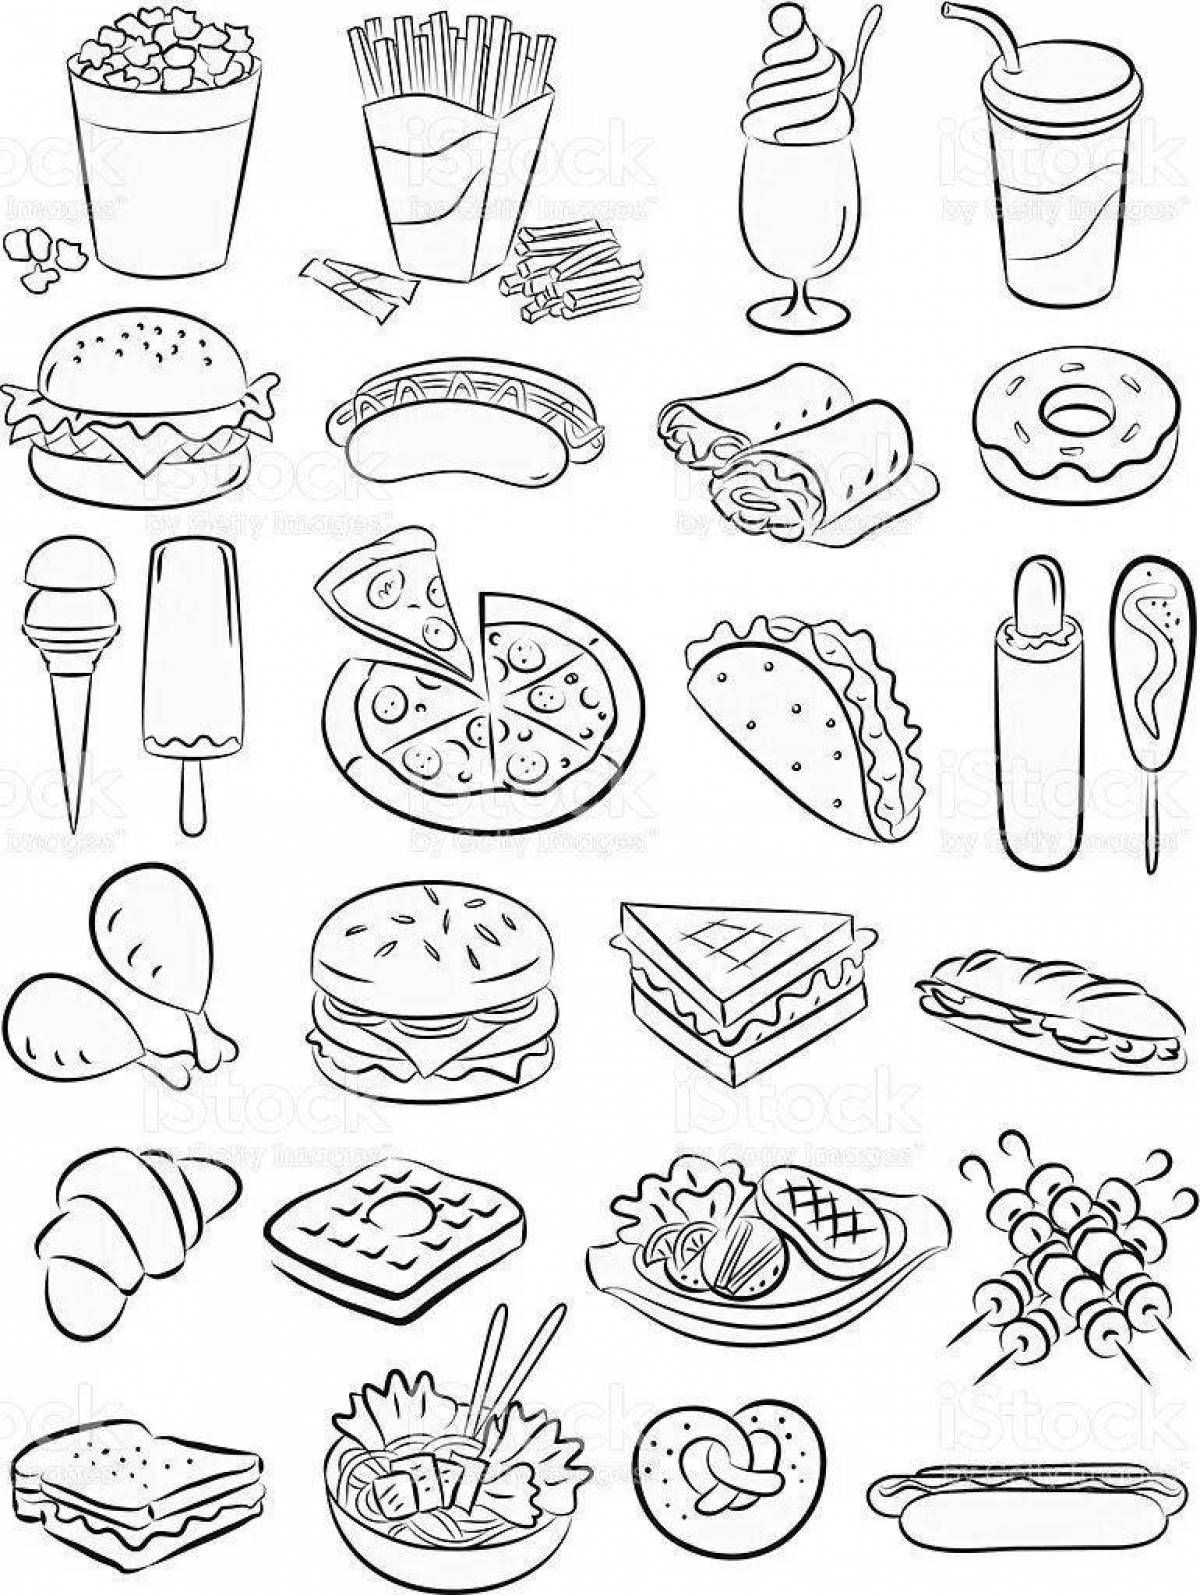 Fun doll food coloring page